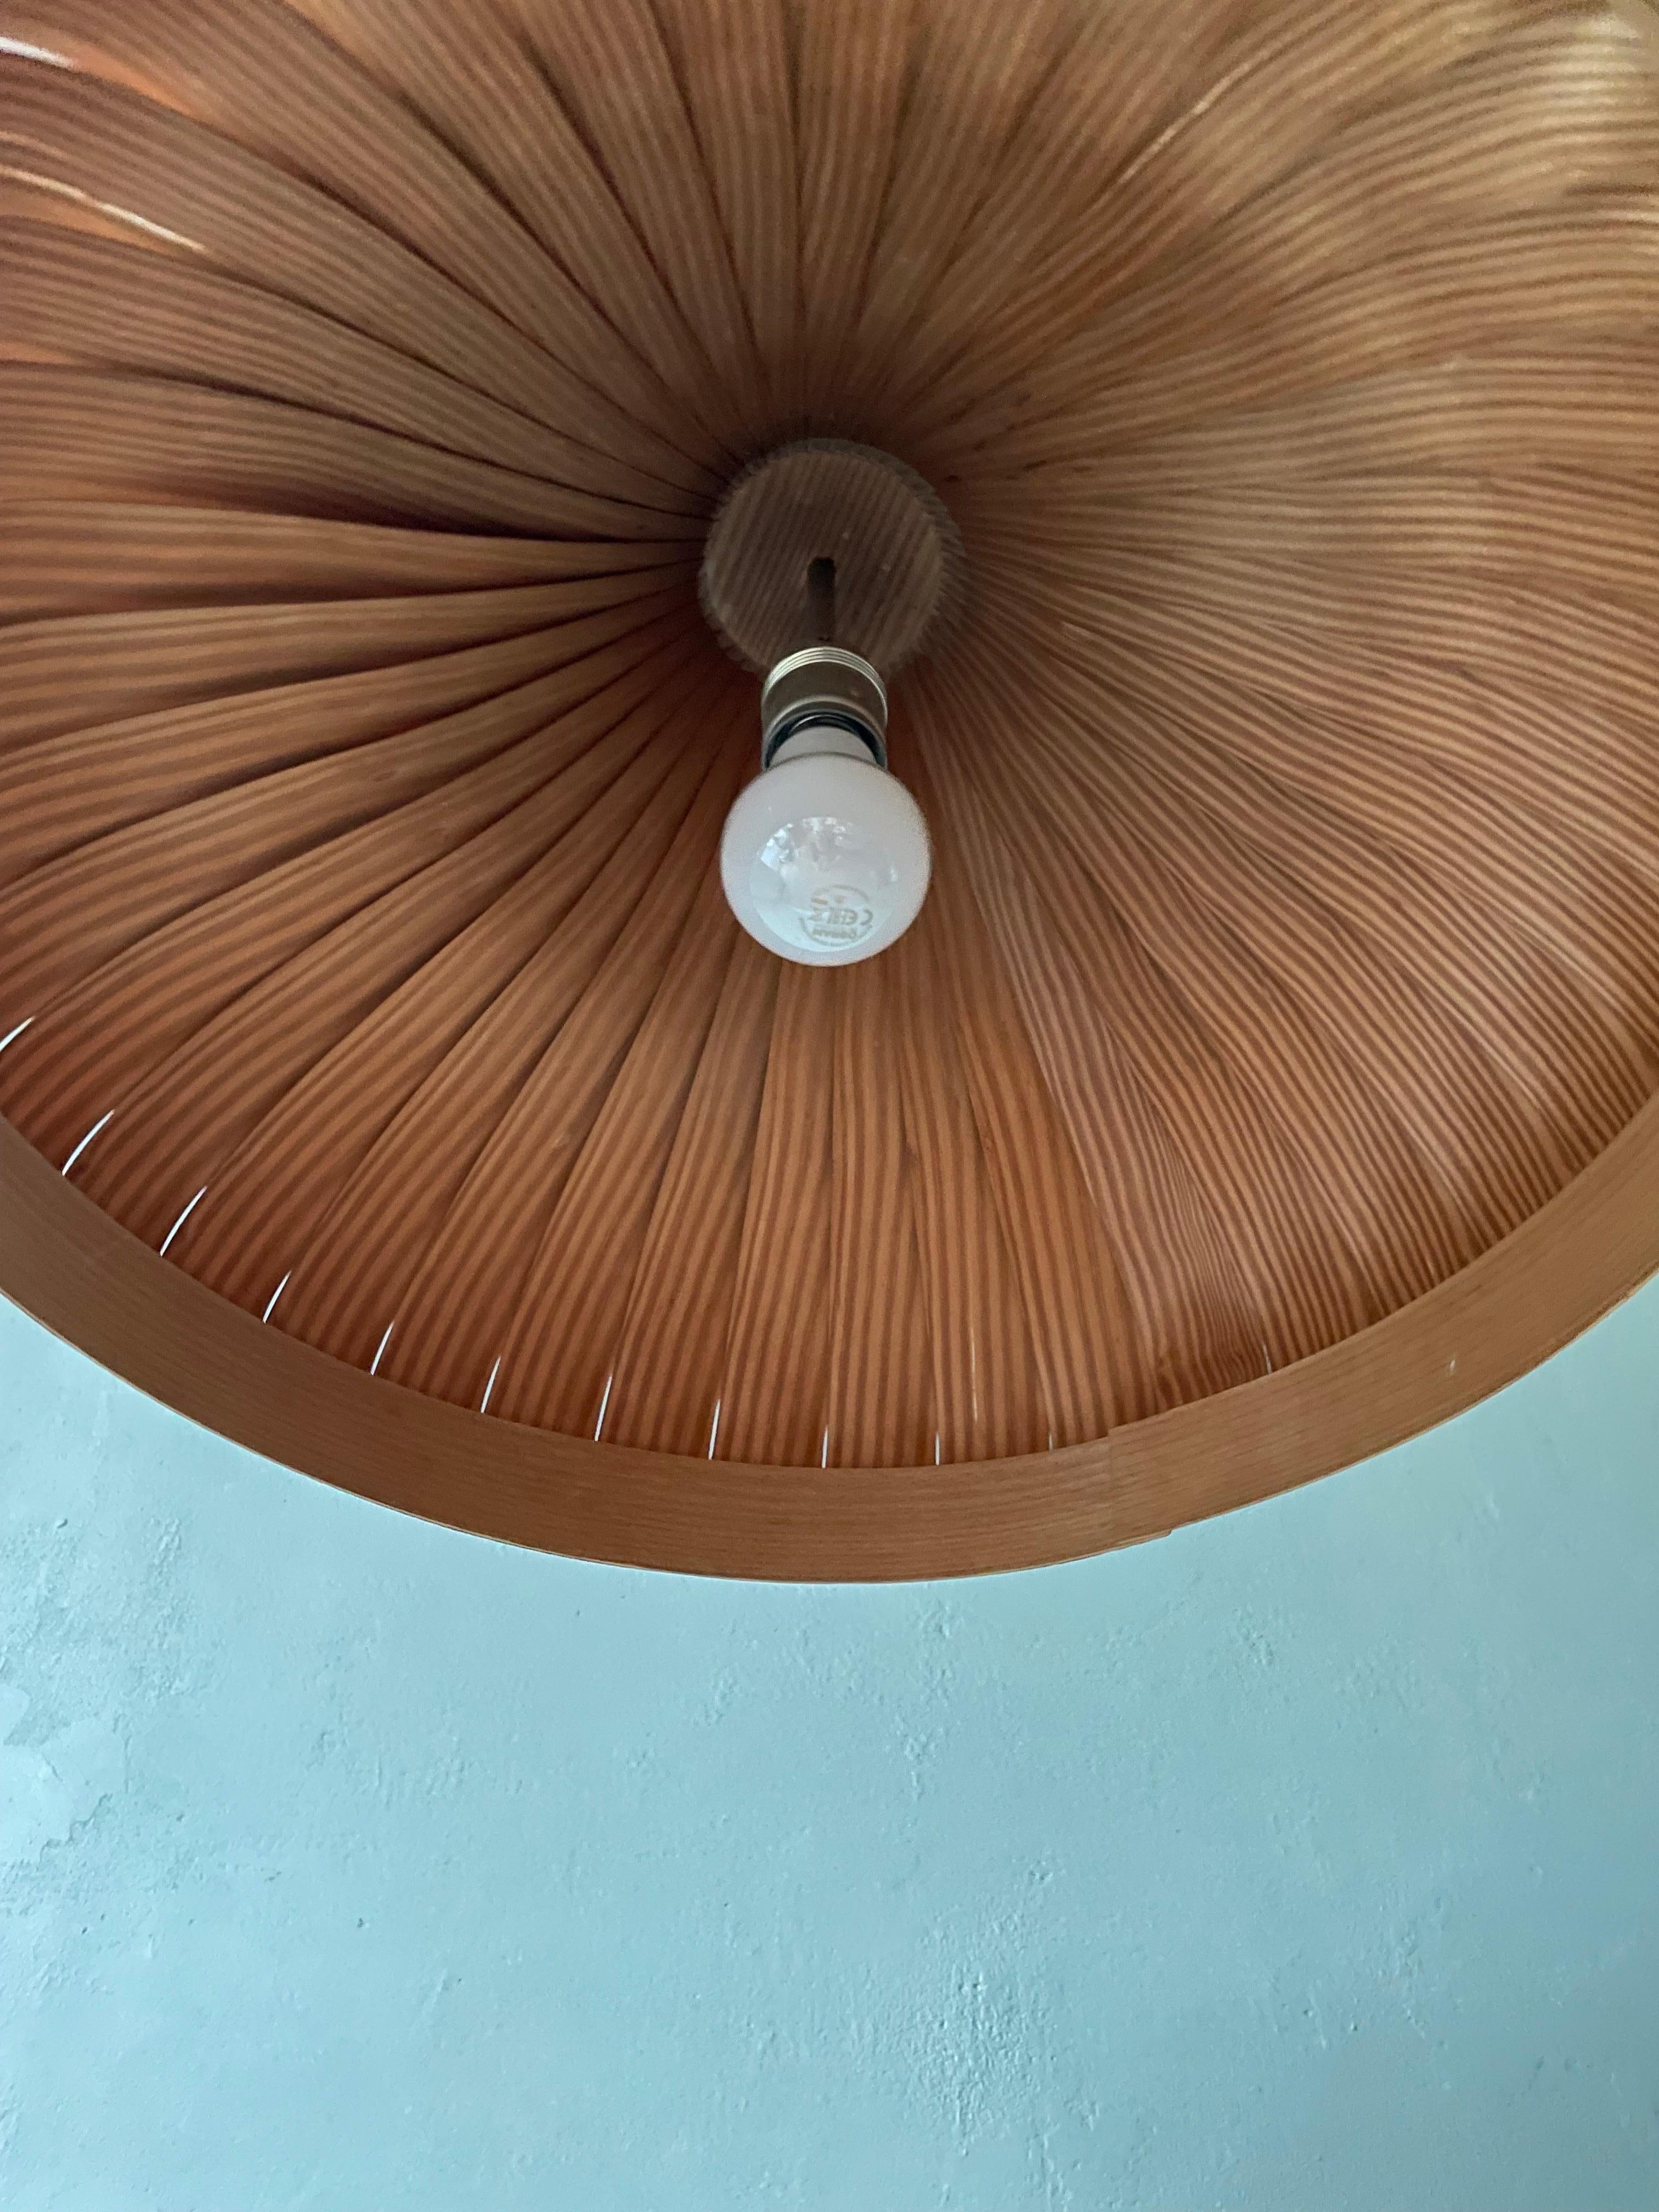 Extraordinary, rare and large Scandinavian midcentury organic modern ceiling light designed by Hans-Agne Jakobsson for Swedish Ellysett. Handmade with slender pine wood veneer slats bent into shape of a swirling slender neck and a large open base.